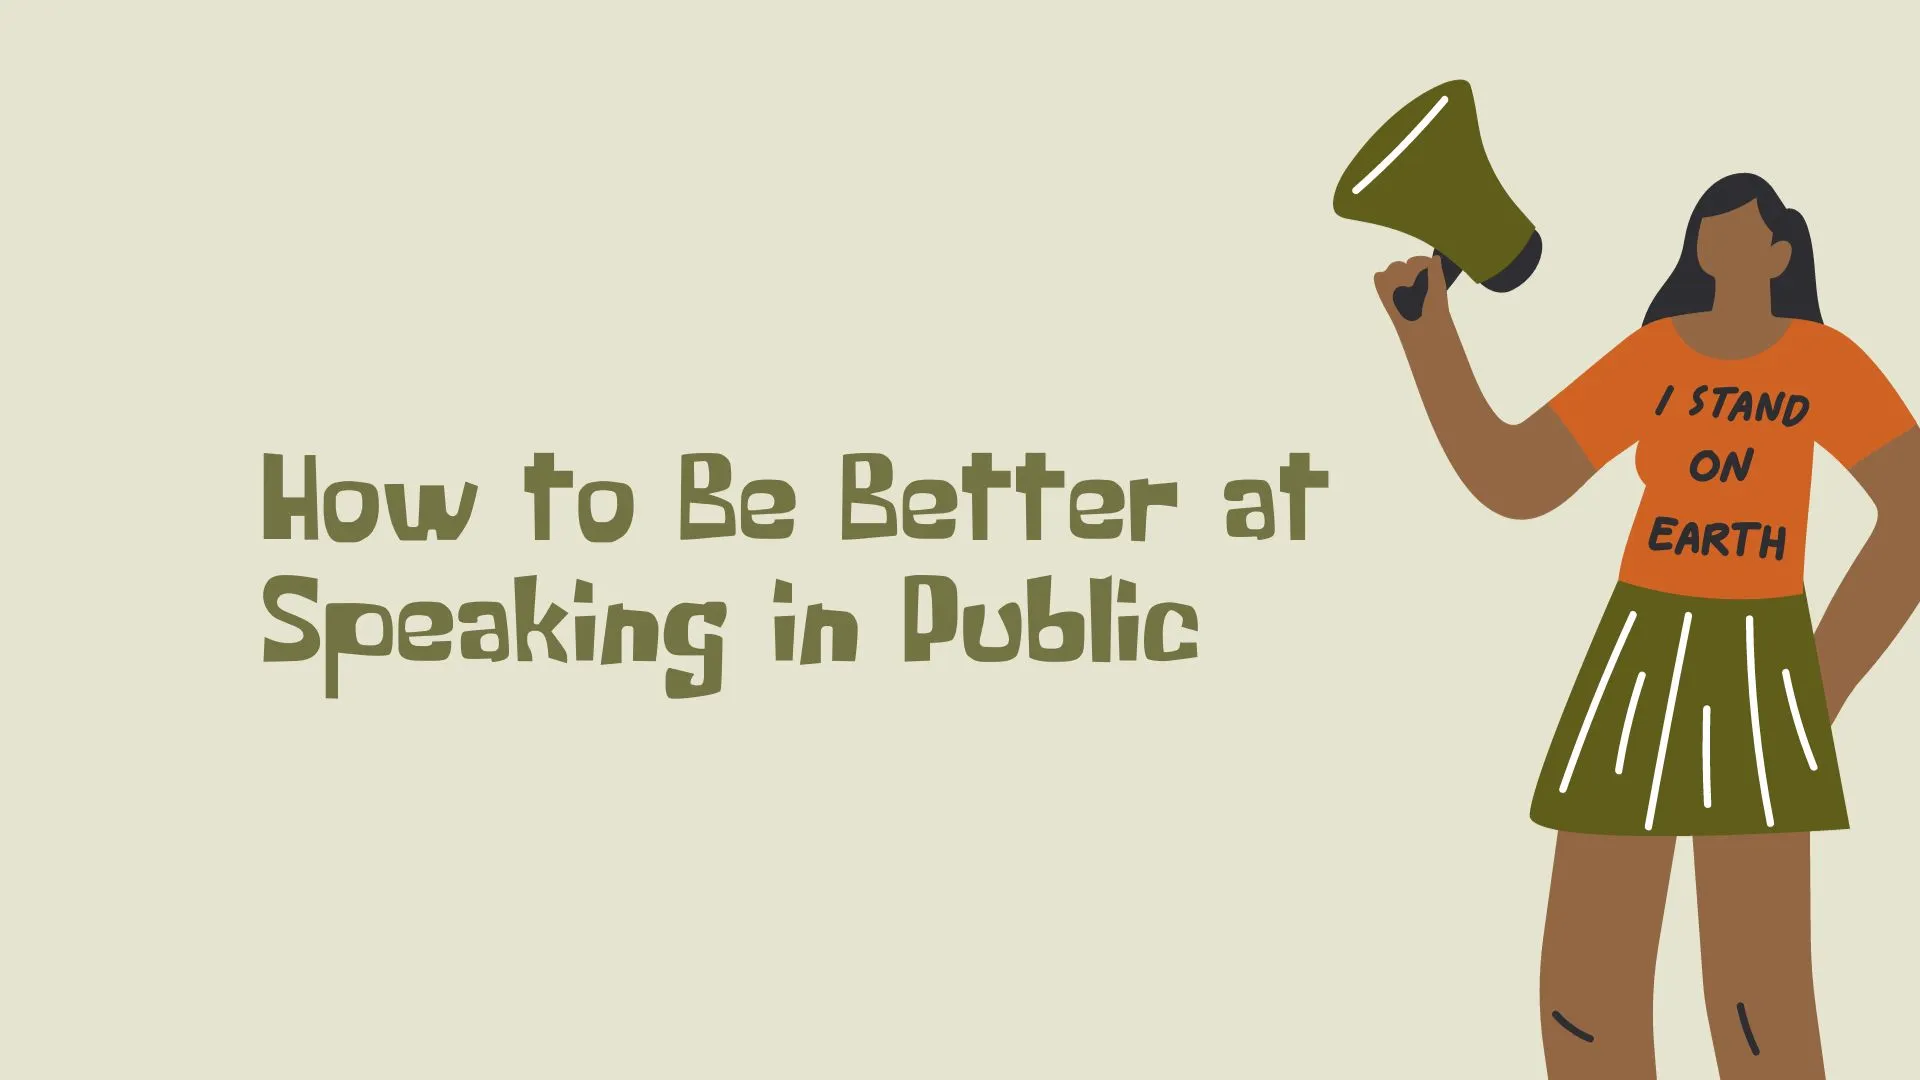 How to Be Better at Speaking in Public